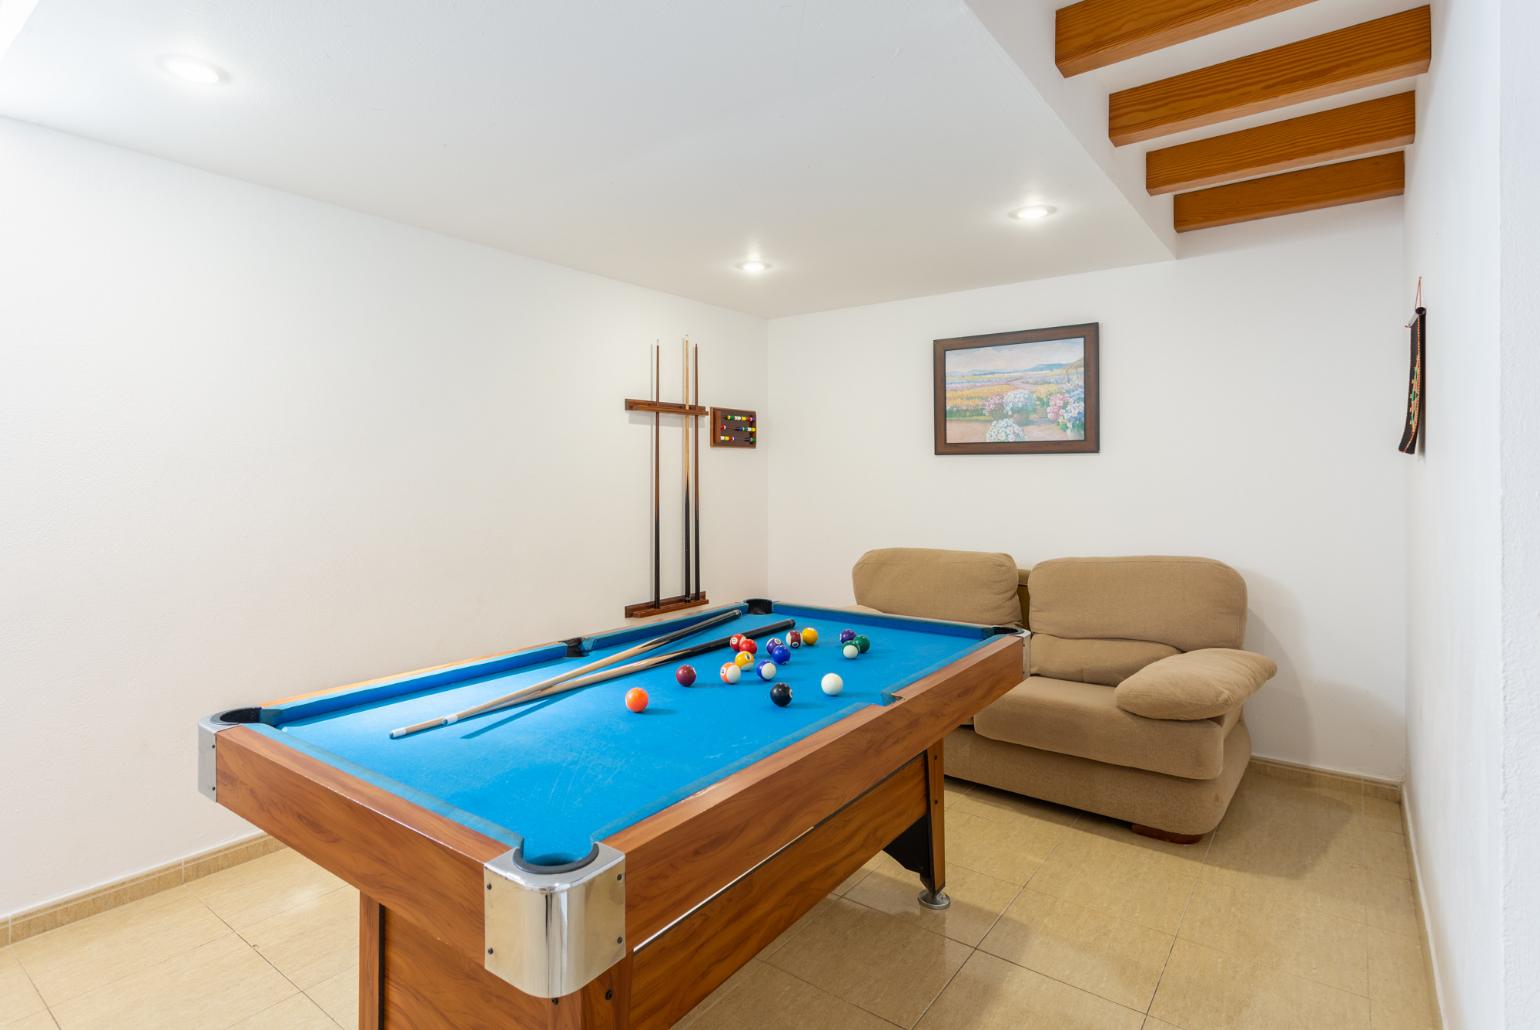 Game room with pool table and sofa